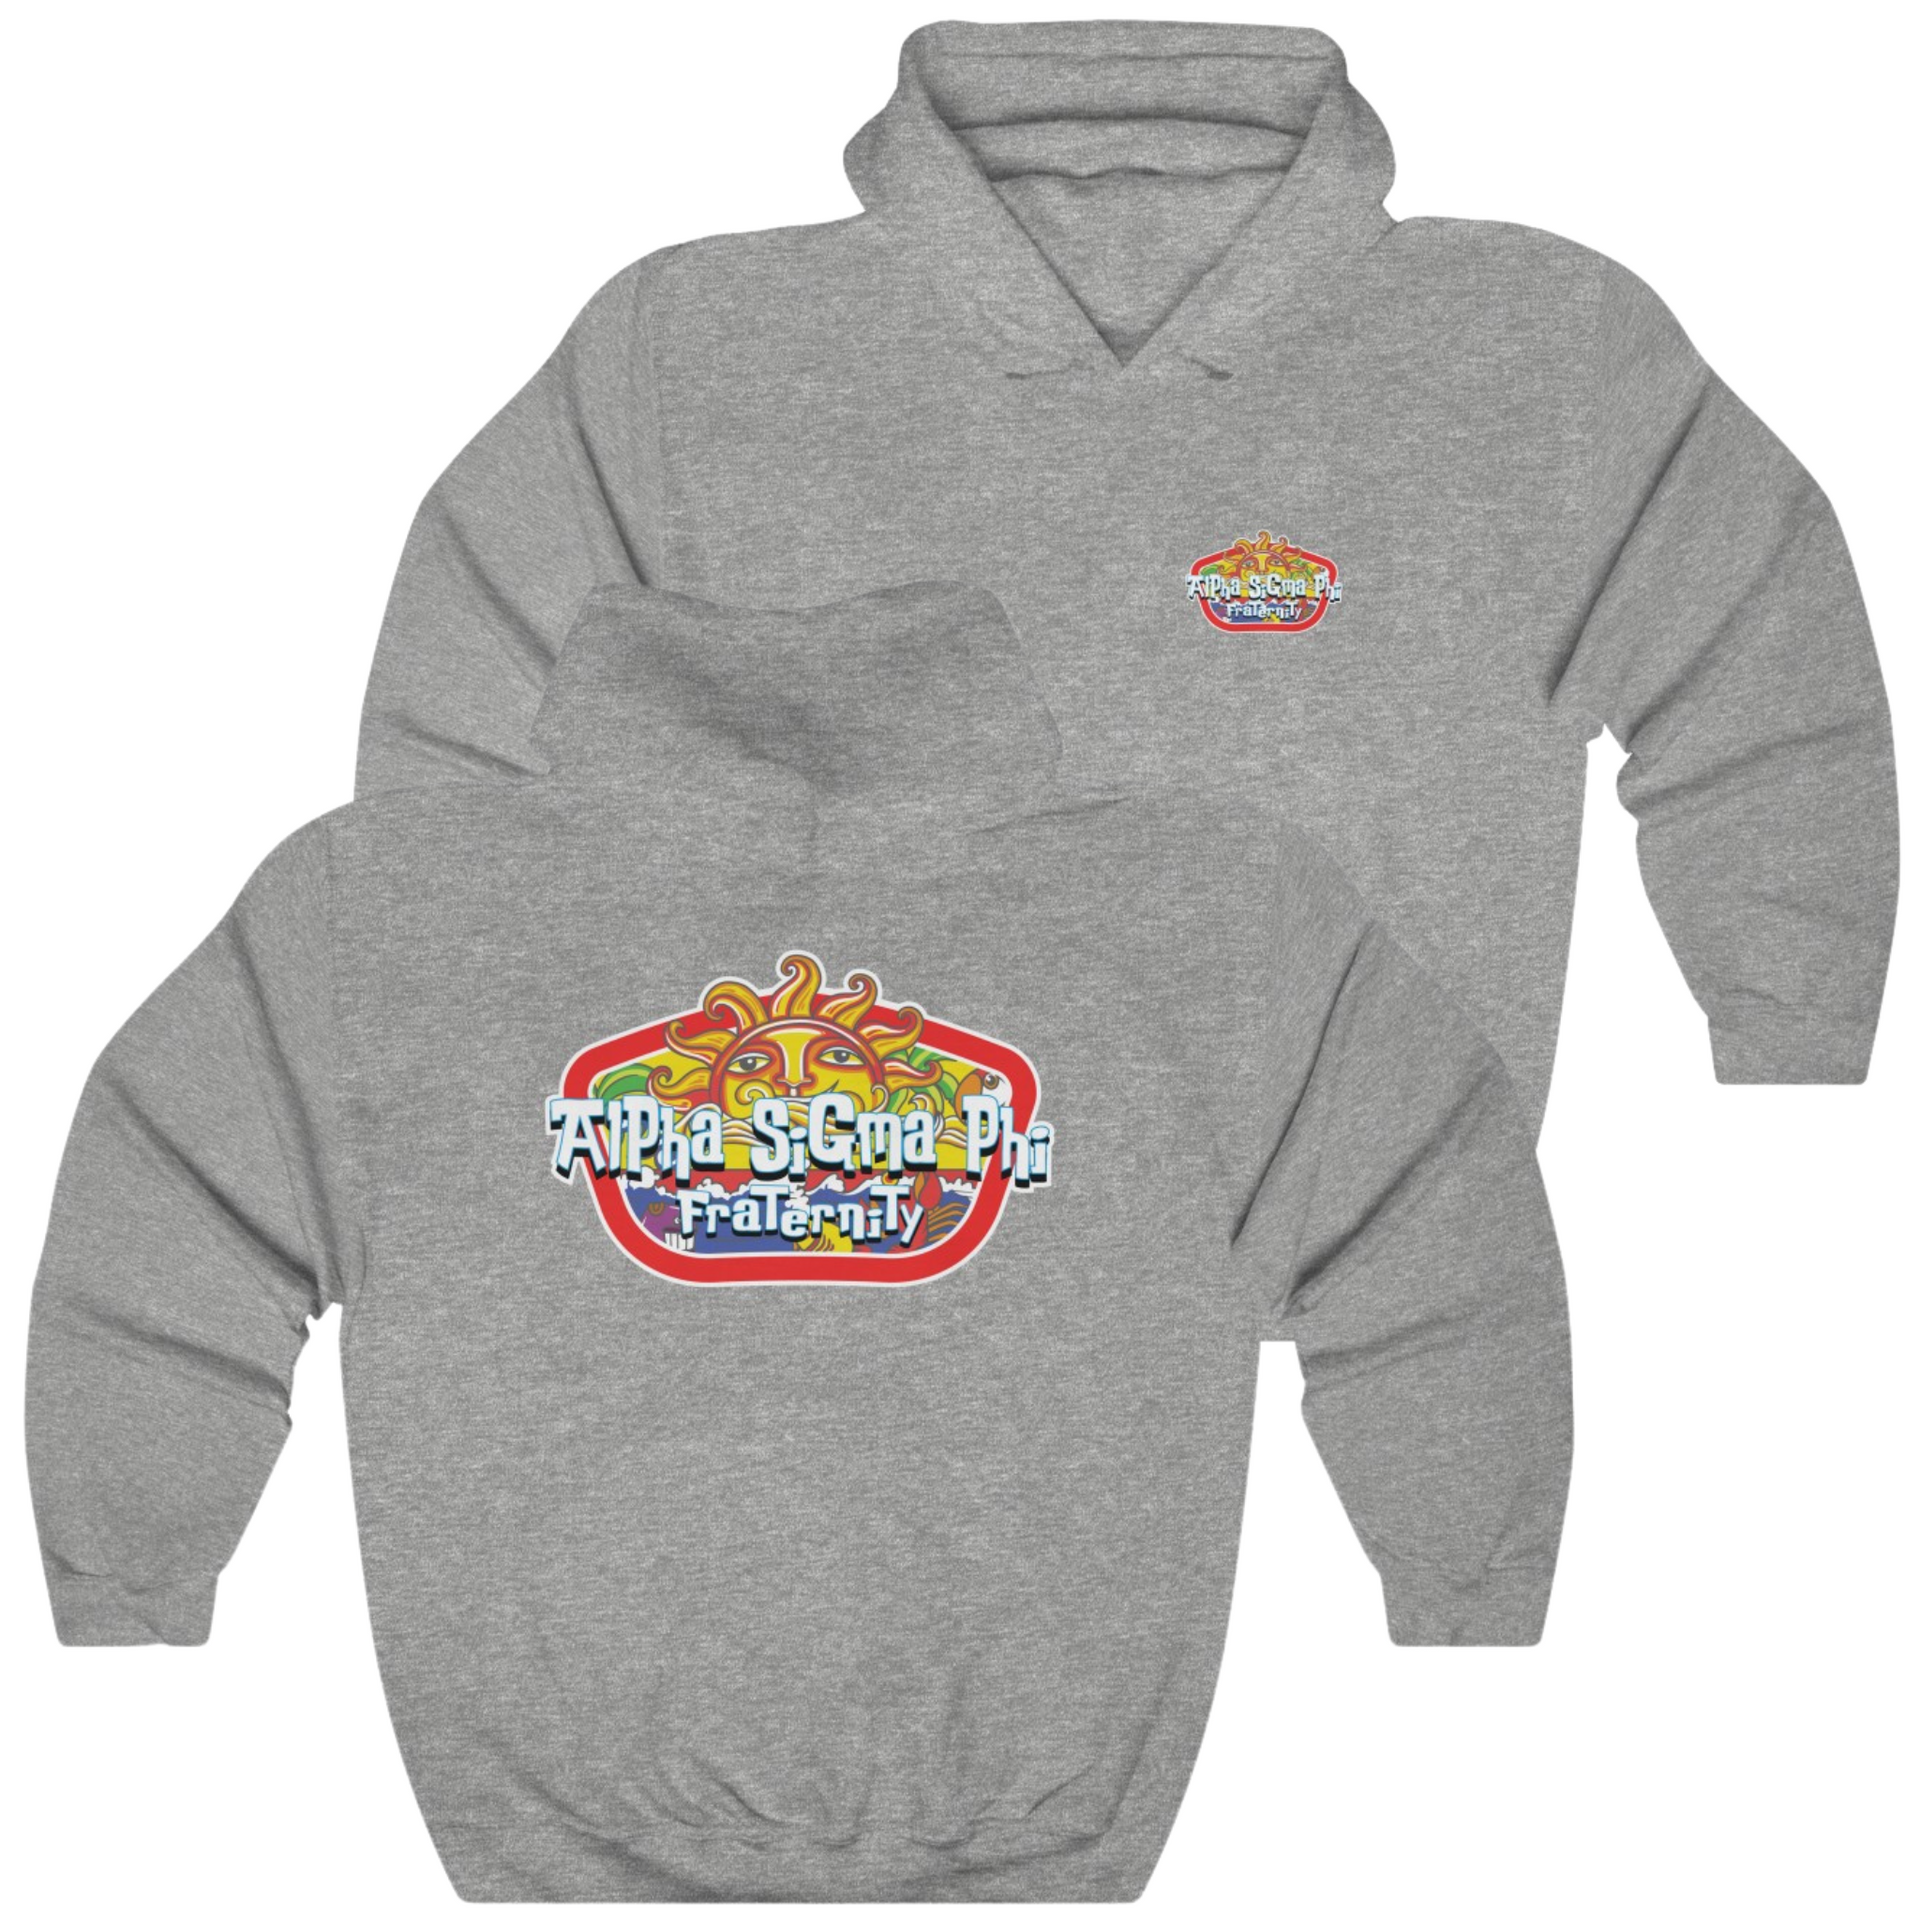 Grey Alpha Sigma Phi Graphic Hoodie | Summer Sol | Alpha Sigma Phi Fraternity Clothing